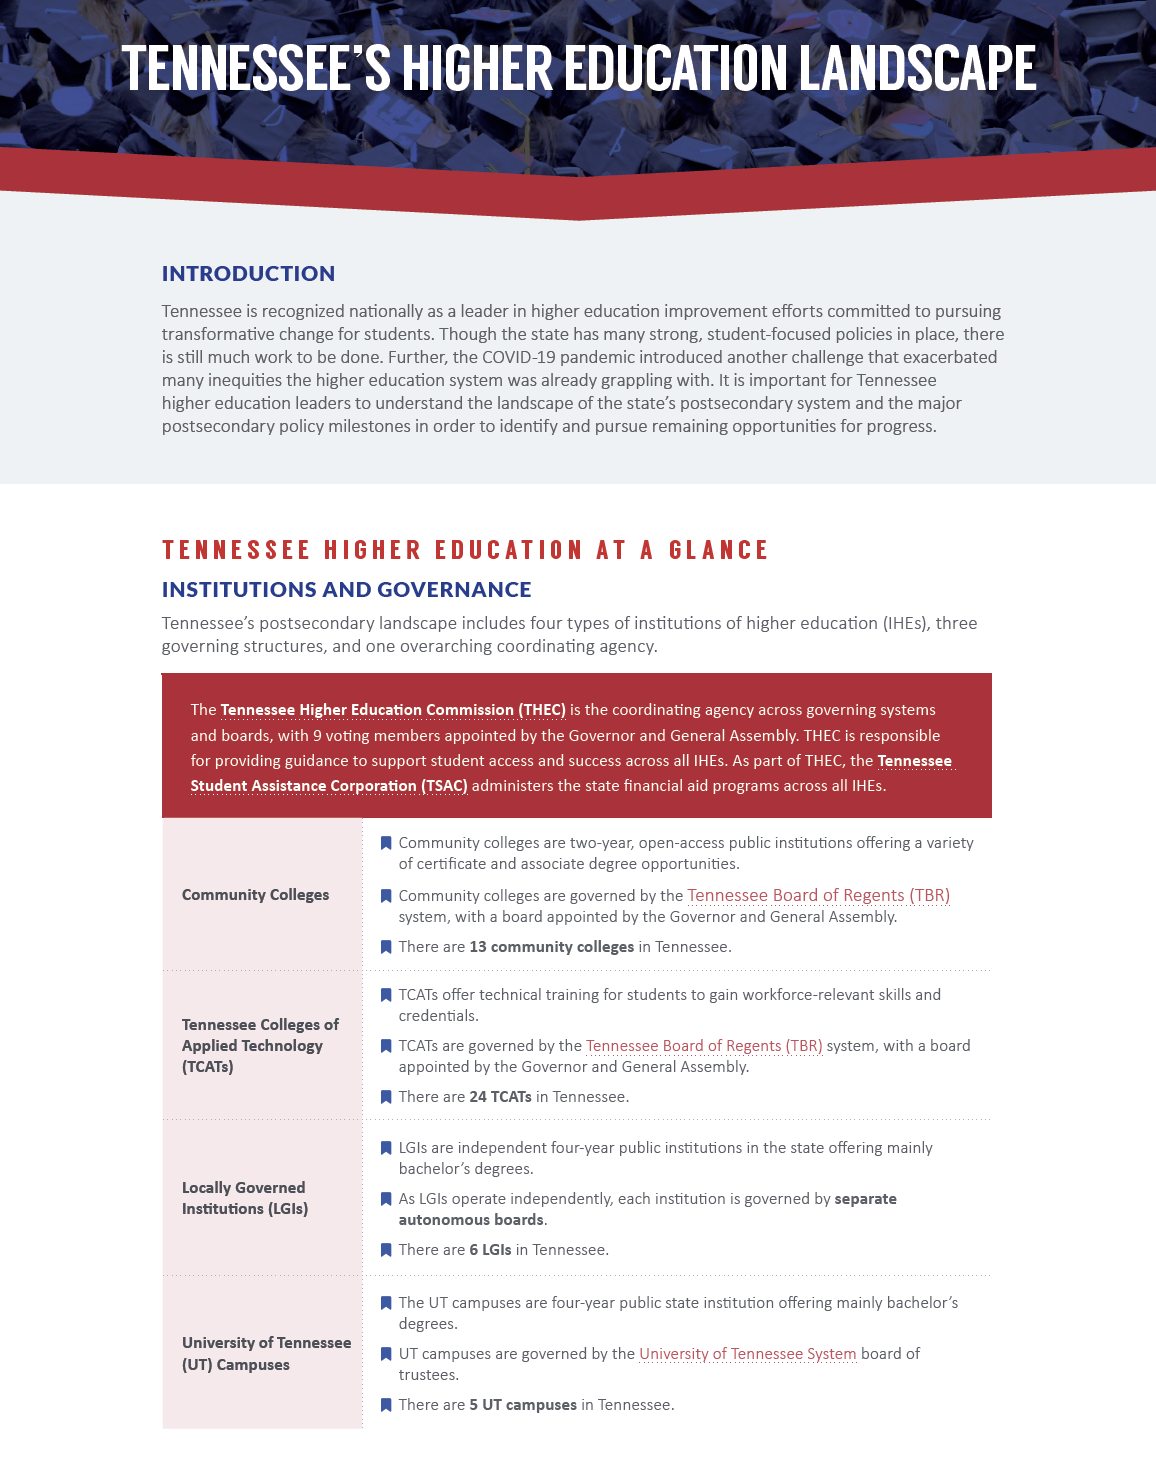 CTLI Tennessee’s Higher Education Landscape Issue Brief